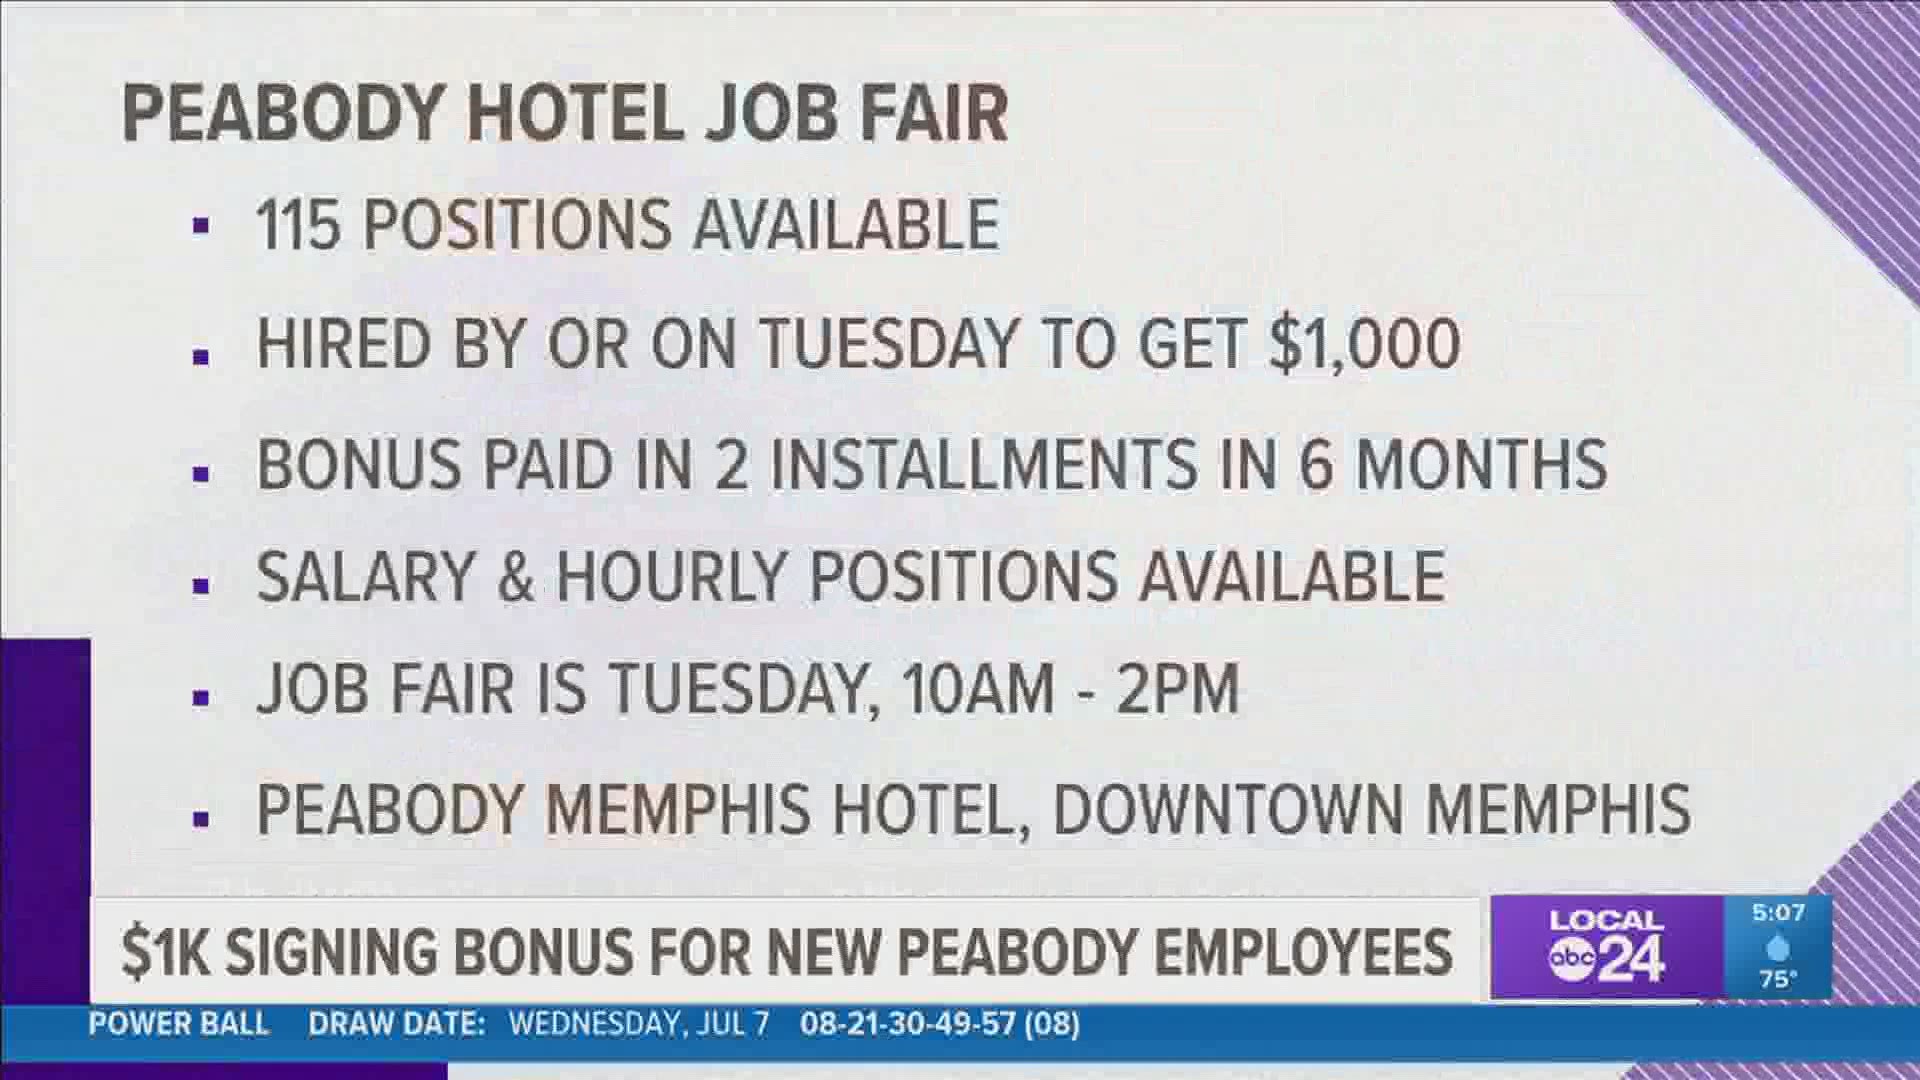 The Peabody Memphis will be holding a job fair on Tuesday, July 13, 10AM – 2PM, to fill more than 115 open positions.